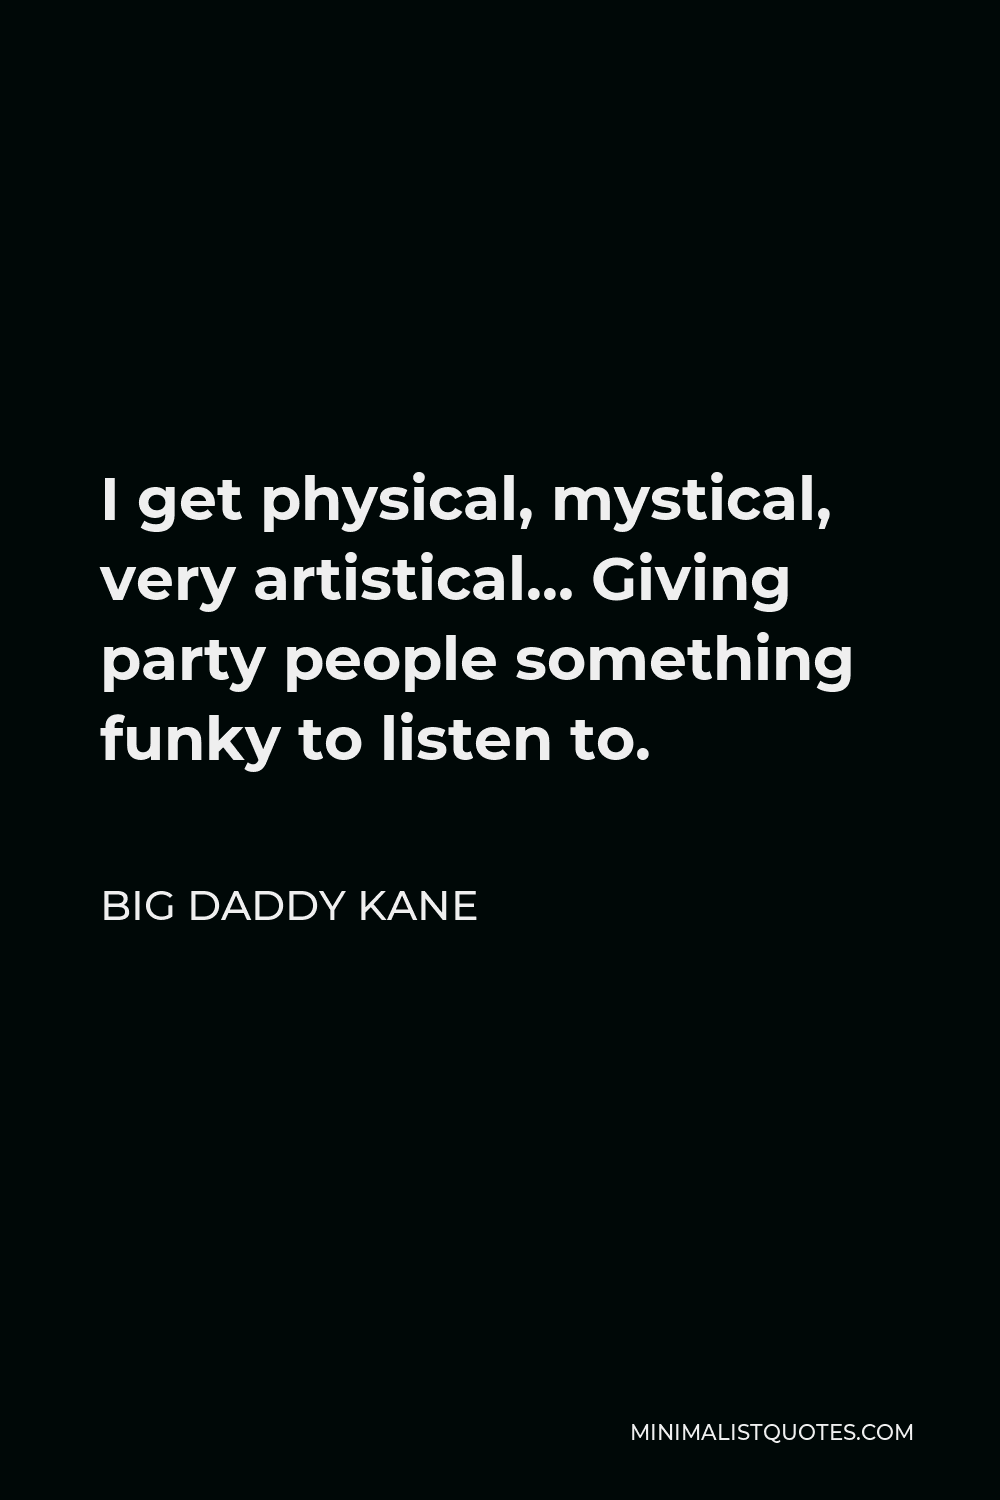 Big Daddy Kane Quote - I get physical, mystical, very artistical… Giving party people something funky to listen to.